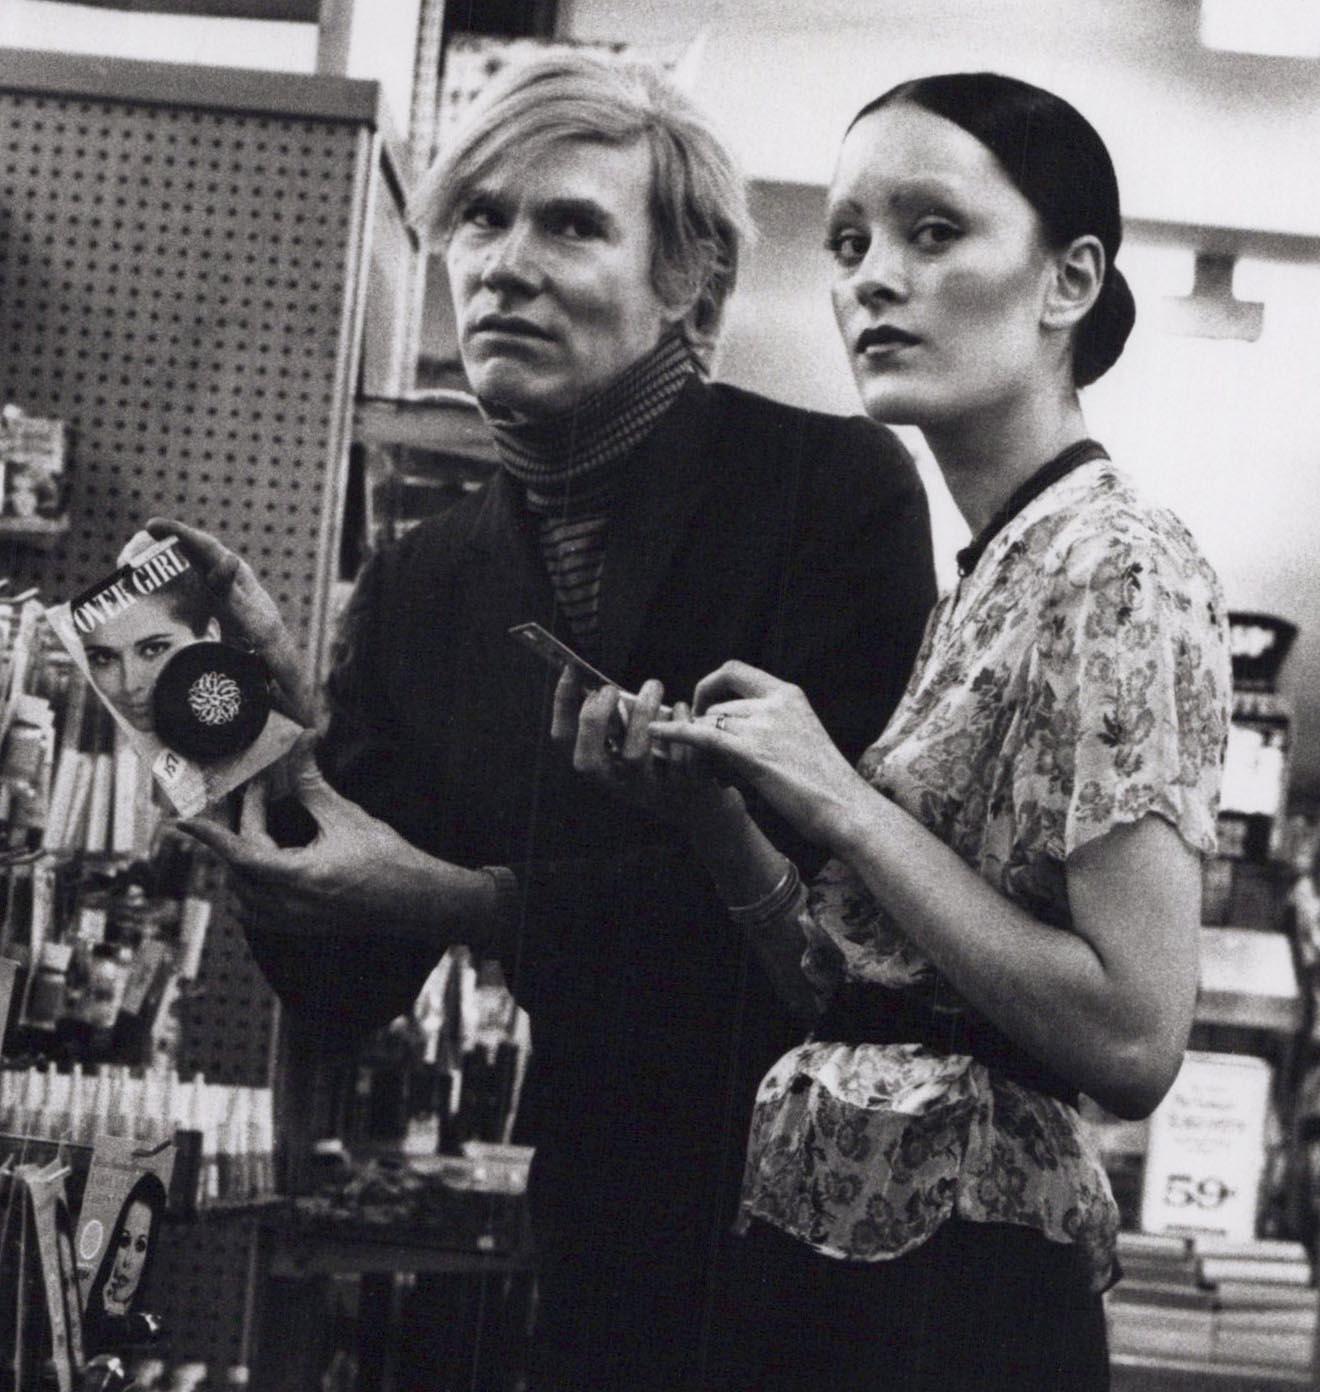 Andy Warhol & Jane Forth Buying Cosmetics in a New York City Drug Store - Photograph by Jack Mitchell